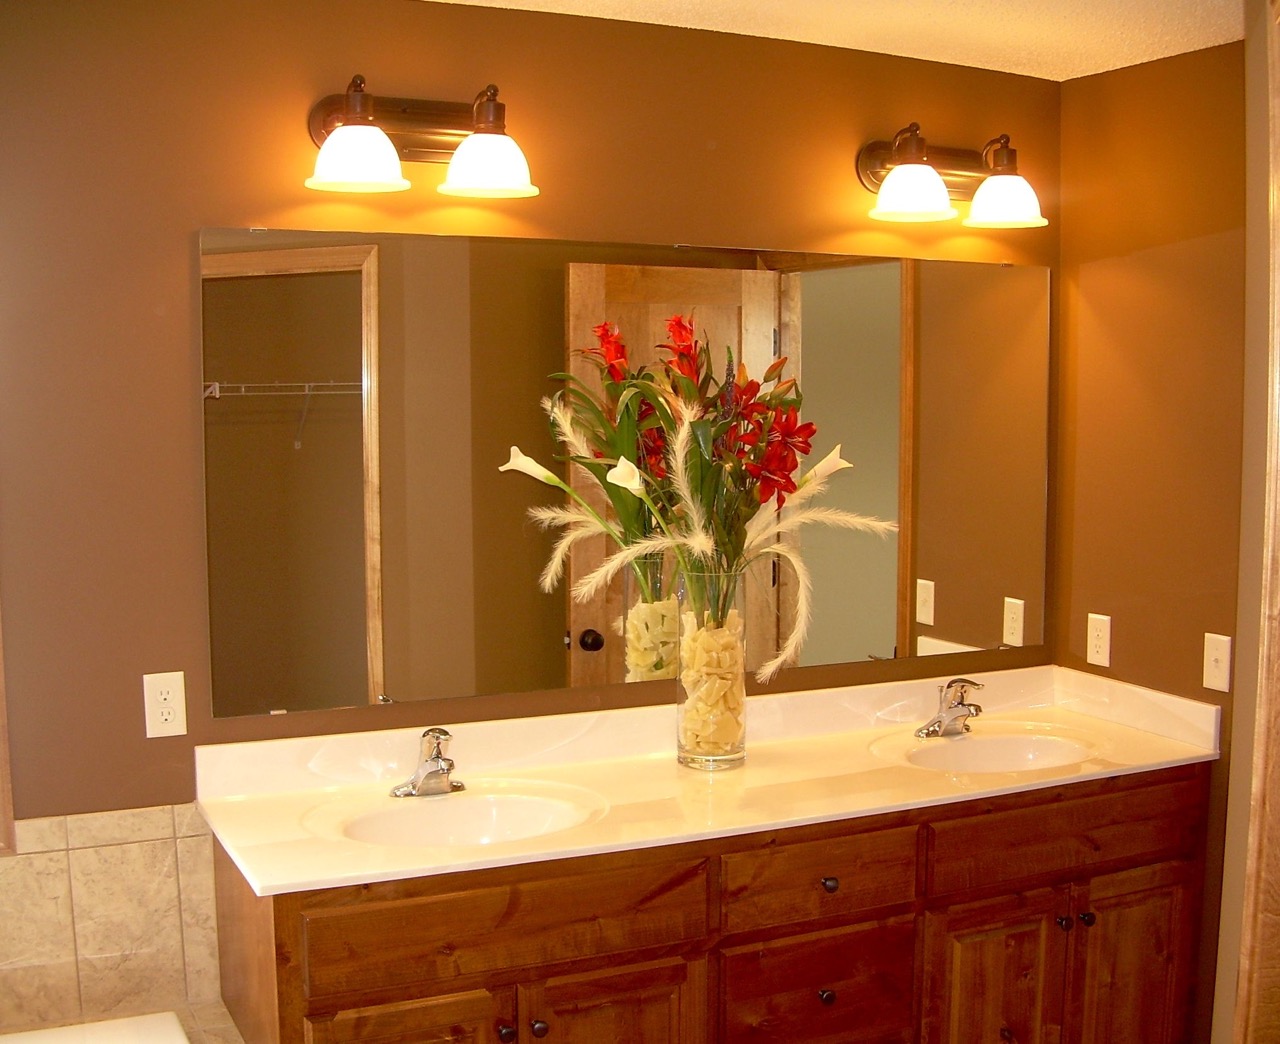 Bathroom Lighting Ideas Over Mirrors: 10 Rules For Side And Over Mirror Lighting